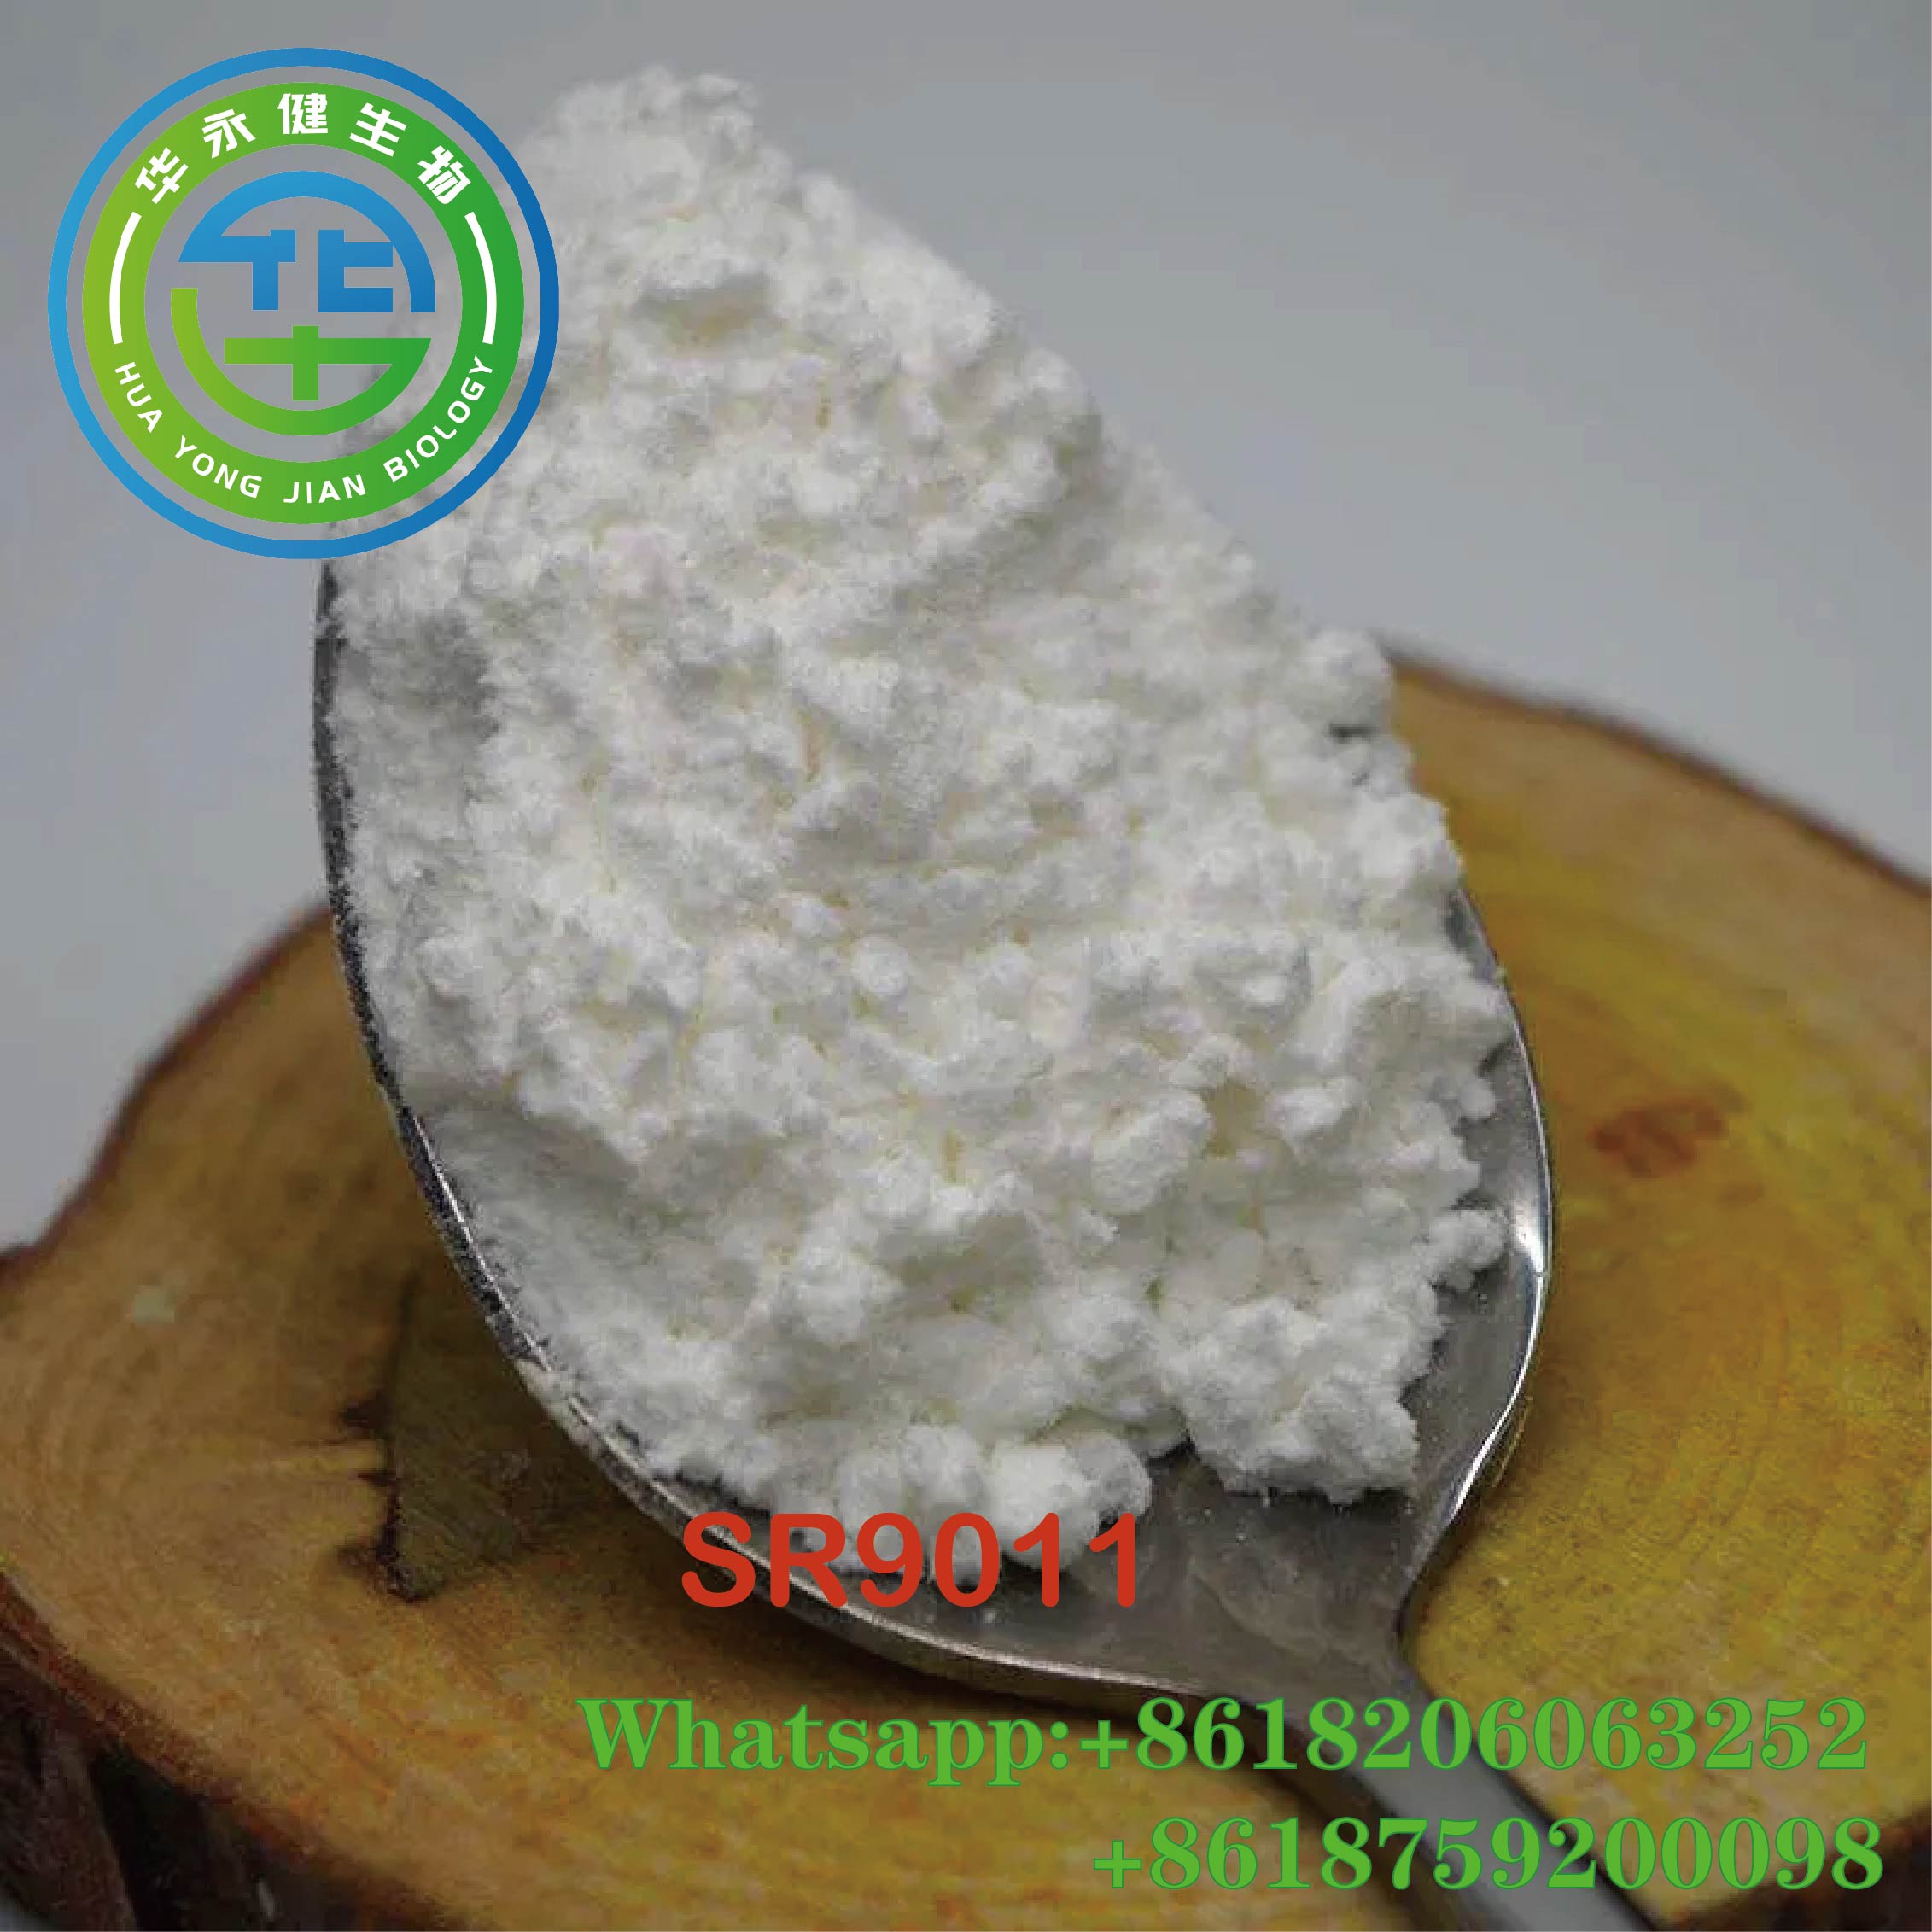 Wholesale Safety Effectiveness Sarms SR9011 Powder for Increasing Lean Body Mass CasNO.1379686-29-9